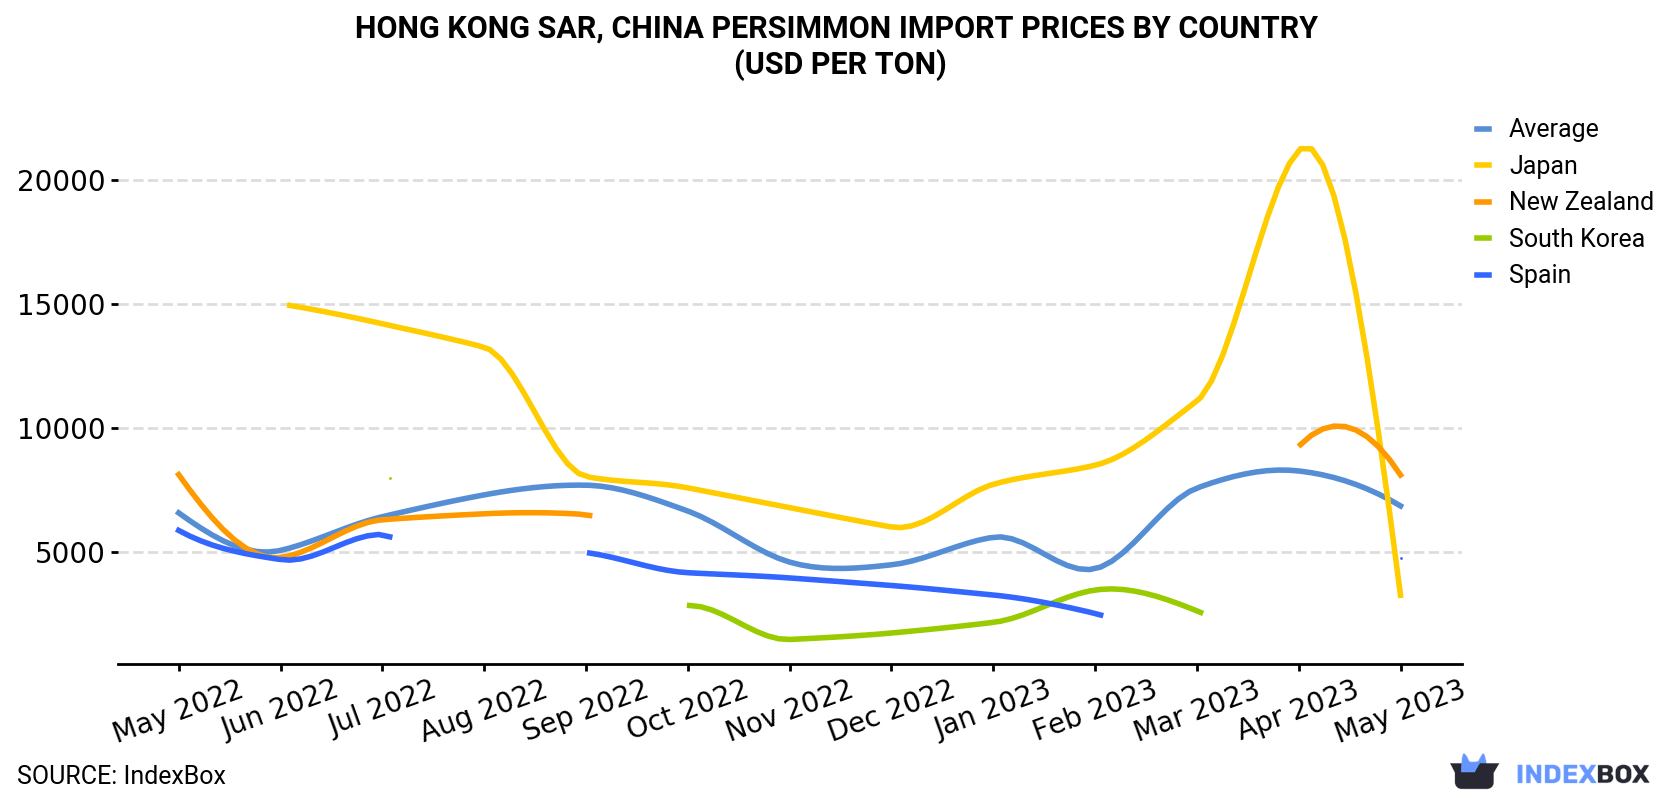 Hong Kong Persimmon Import Prices By Country (USD Per Ton)